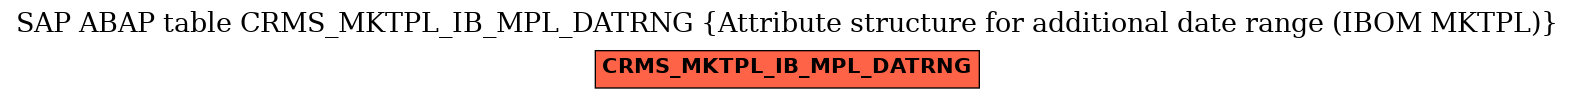 E-R Diagram for table CRMS_MKTPL_IB_MPL_DATRNG (Attribute structure for additional date range (IBOM MKTPL))